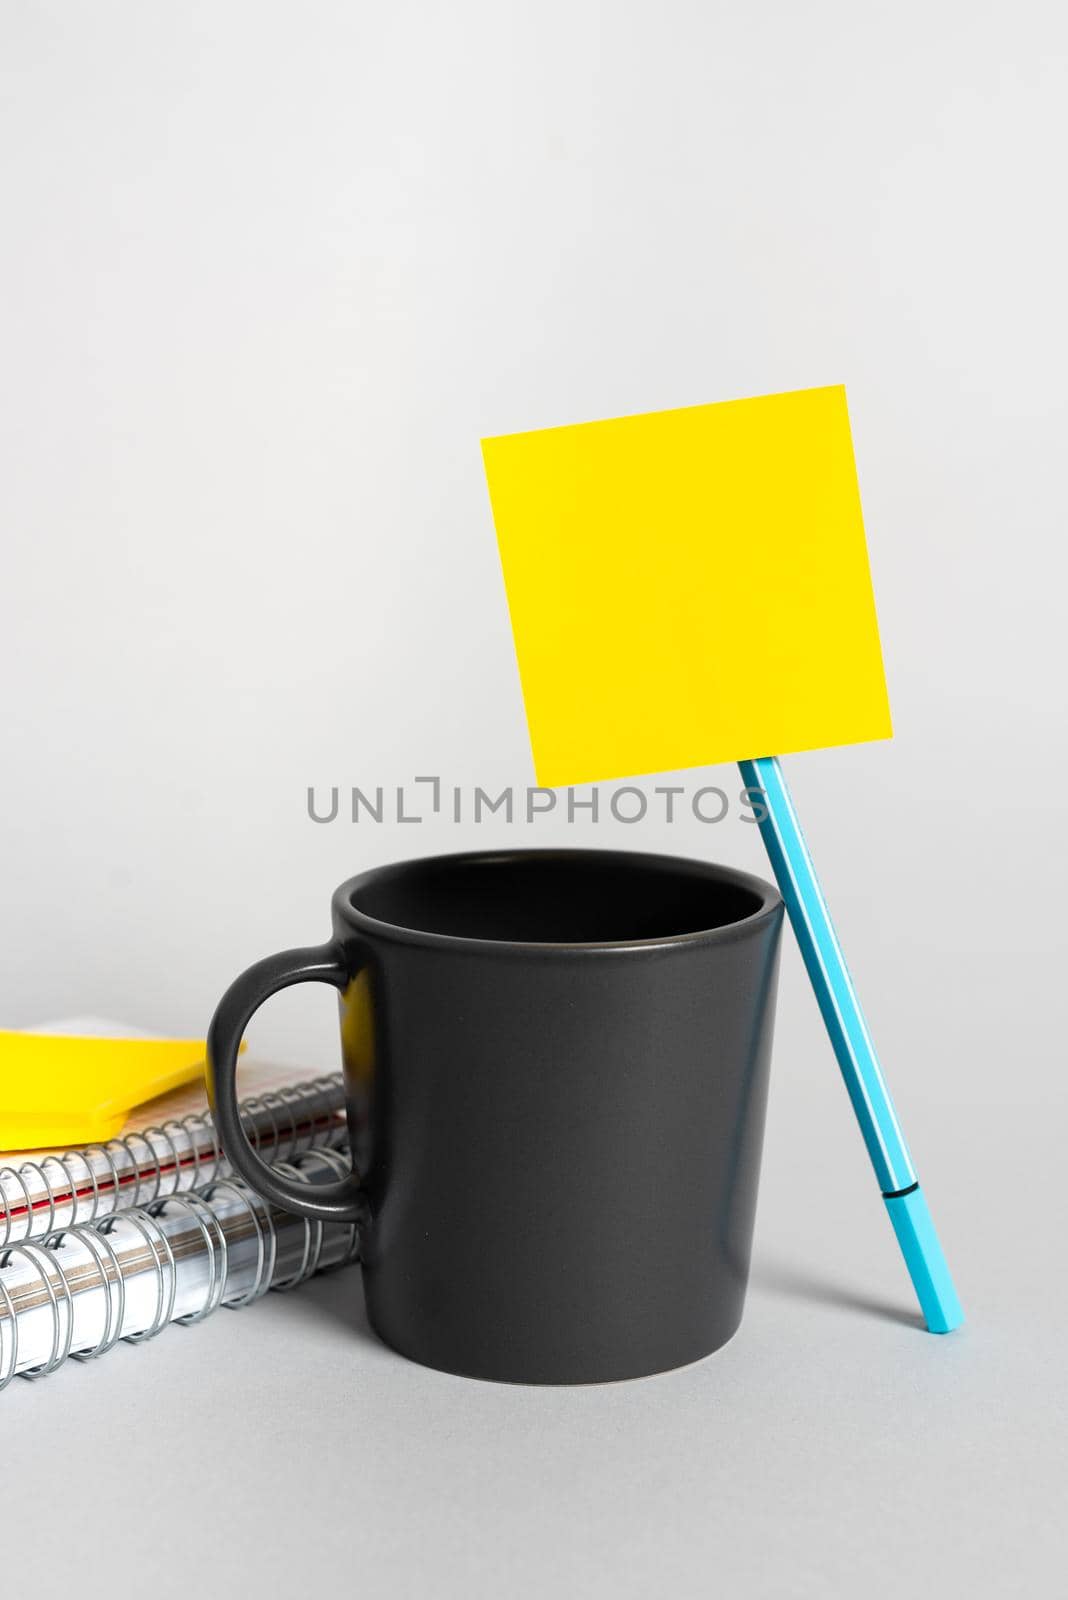 Cup, Pen, Notebooks And Sticky Note With Important Message On Desk. Mug, Pencil And Crutial Announcement On Table. Coffee, Ball Point And Critical Information On Paper. by nialowwa